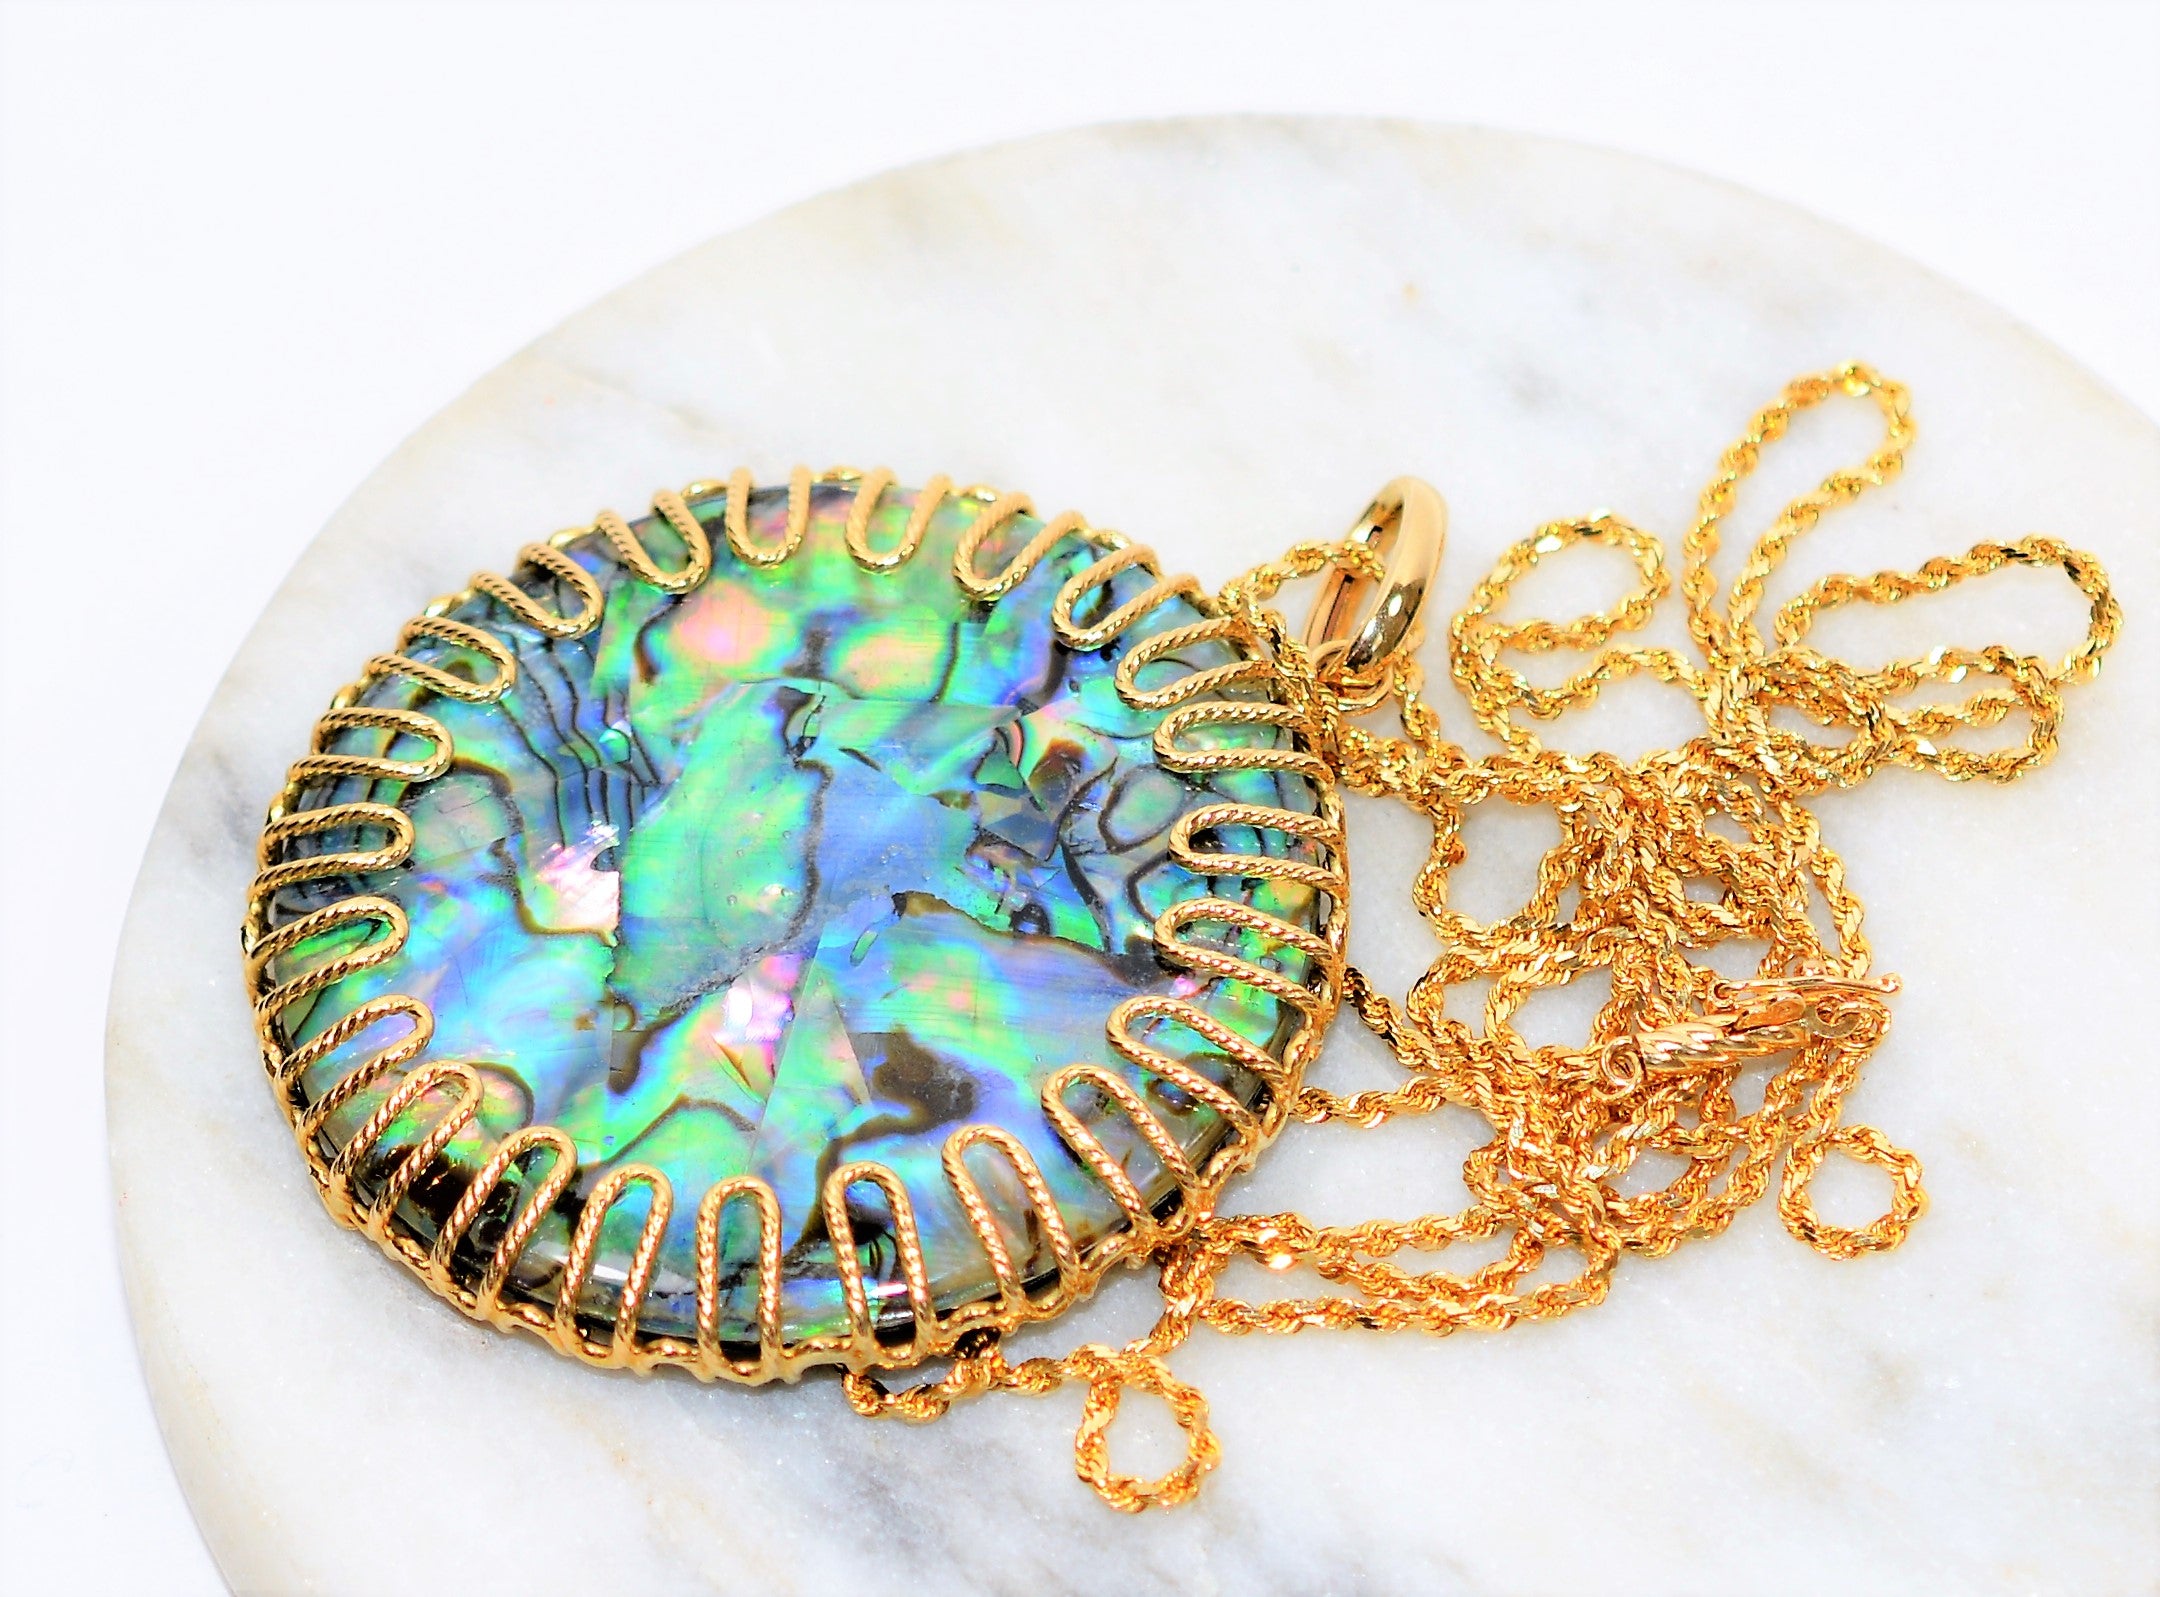 Natural Abalone Necklace 14K Solid Gold 48mm Pendant Necklace Reversible Pendant Gemstone Necklace Statement Necklace Abalone Shell Estate